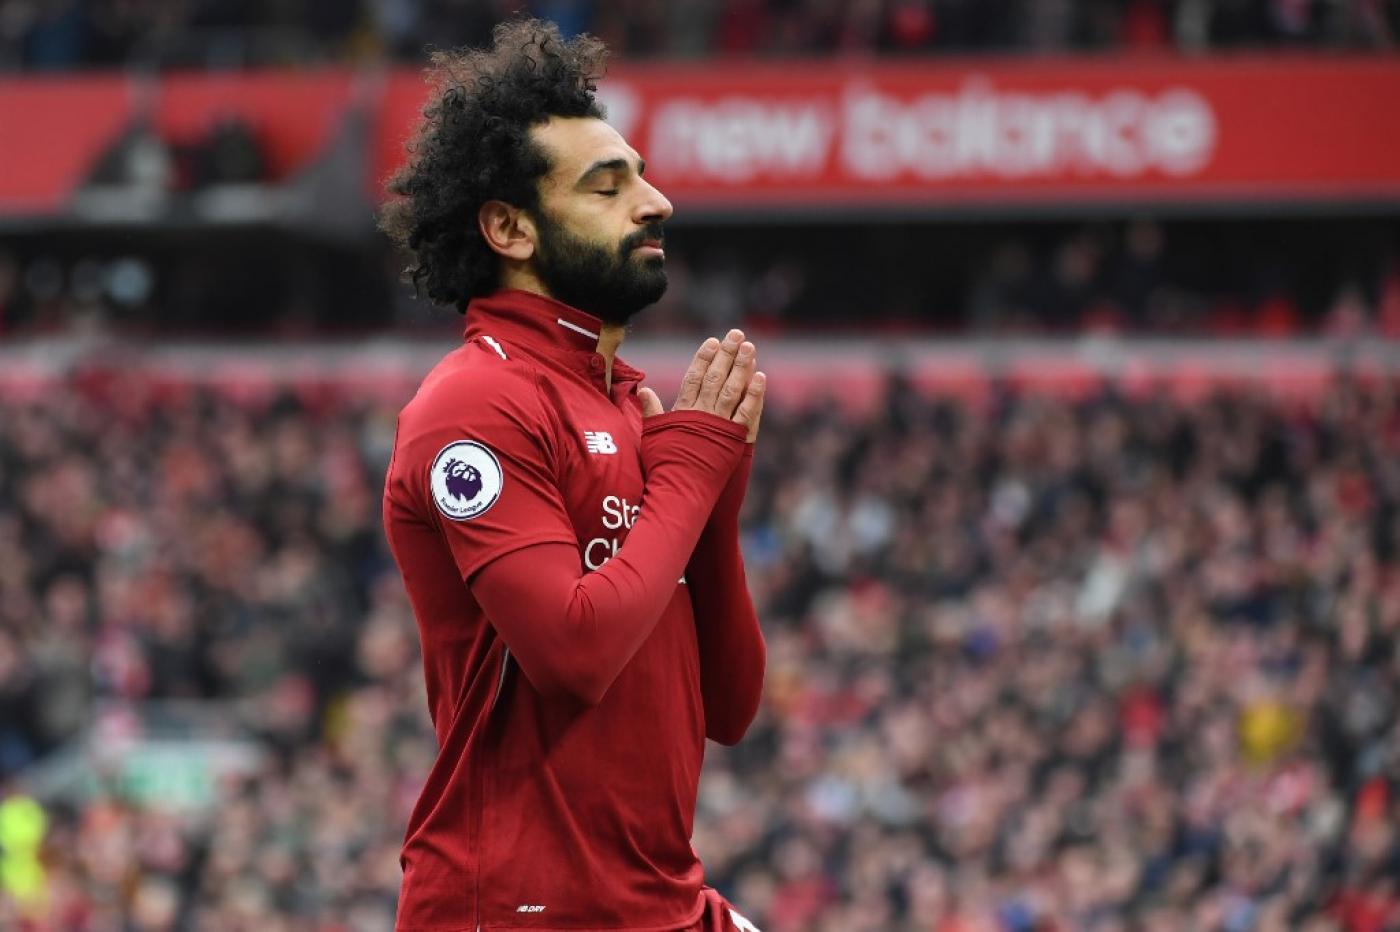 Liverpool star Mohamed Salah questioned over one thing as Lionel Messi comparison made - Bóng Đá